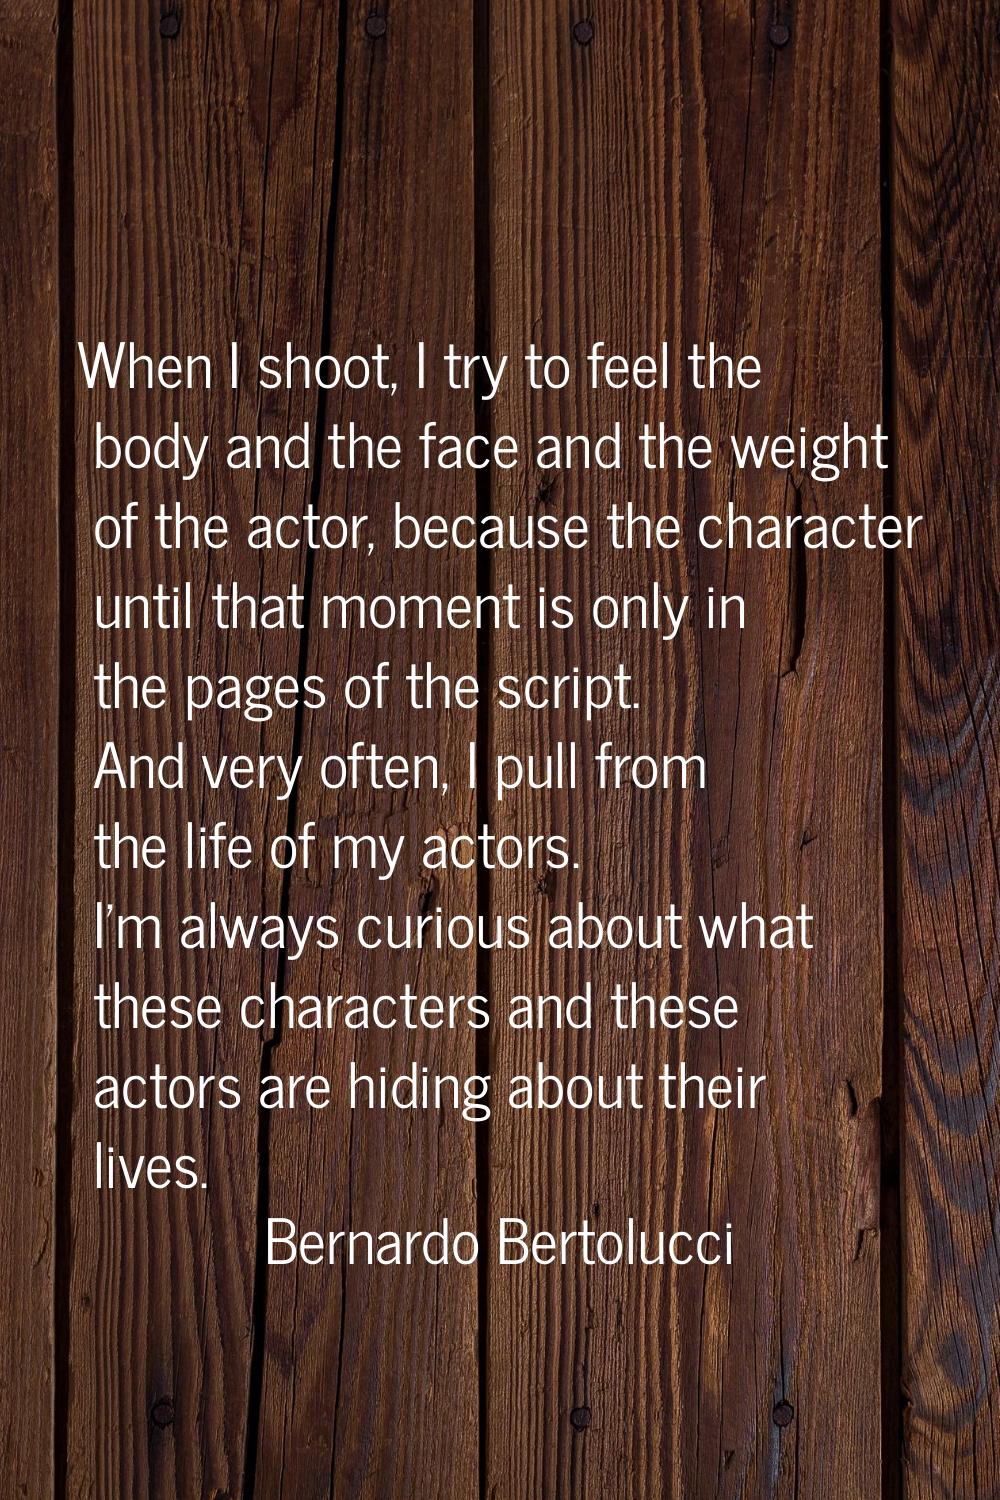 When I shoot, I try to feel the body and the face and the weight of the actor, because the characte